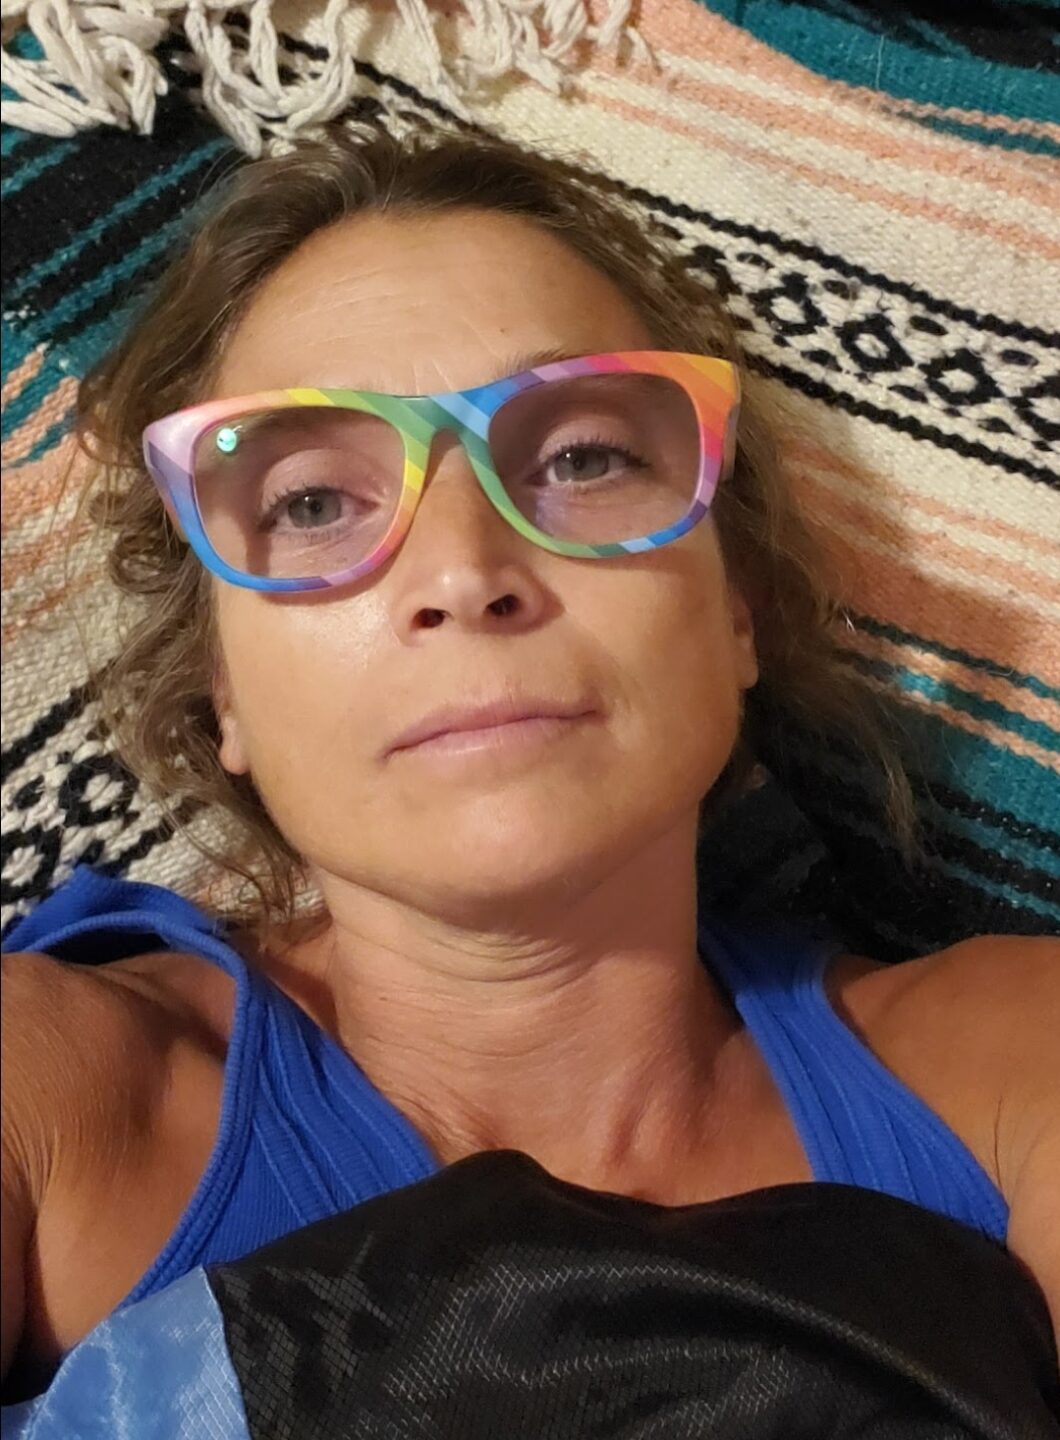 middle-aged female, no jewelry, emotionally neutral expression, cafe au lait skin color, green eyes, brown curly shoulder length hair, wearing large lens eyeglasses with rainbow color frames and a royal blue tank top